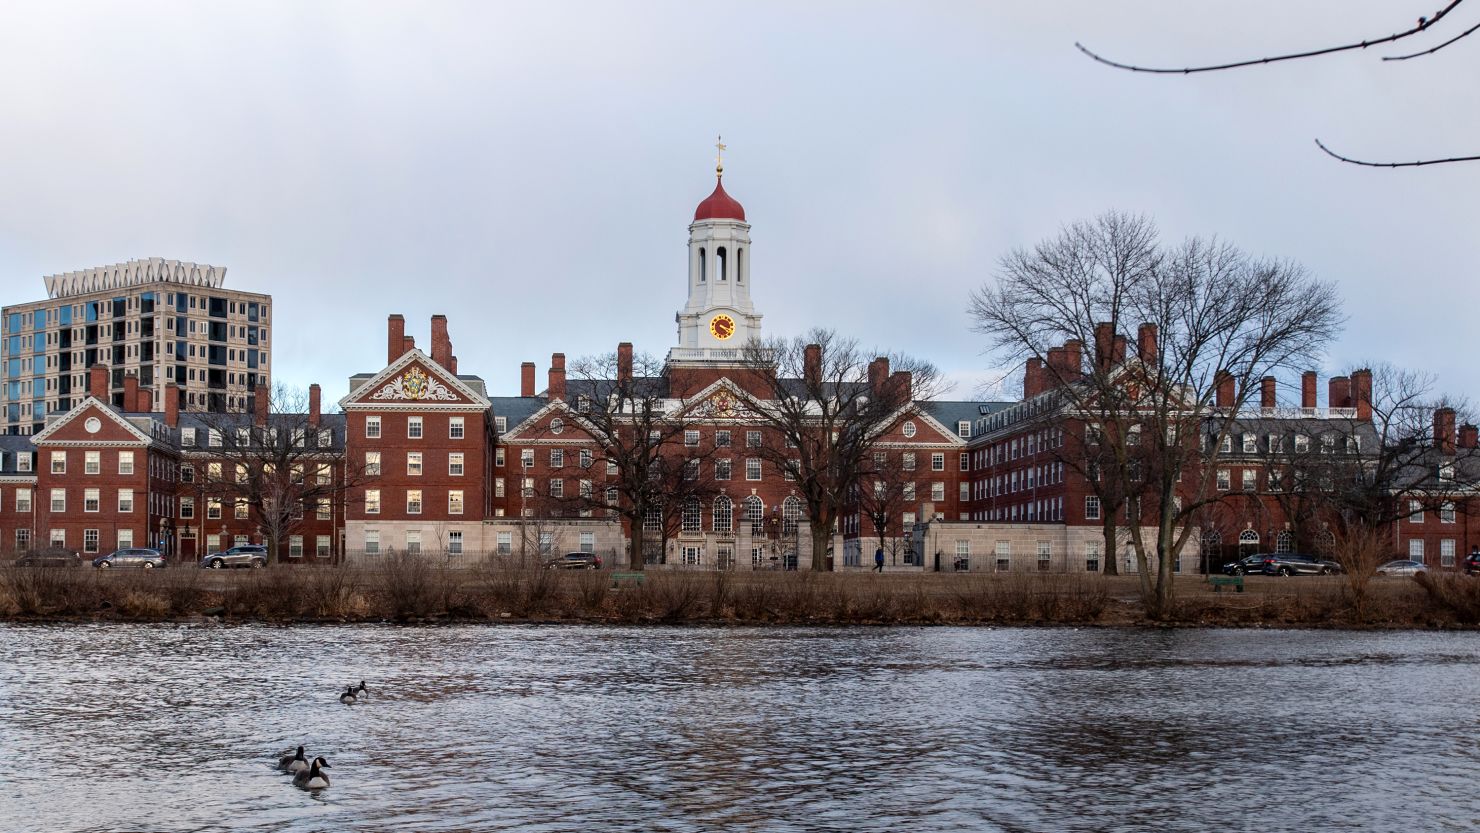 Harvard University and its interim president have condemned an antisemitic cartoon circulated by three campus groups, prompting them to remove the image from social media and apologize for it.